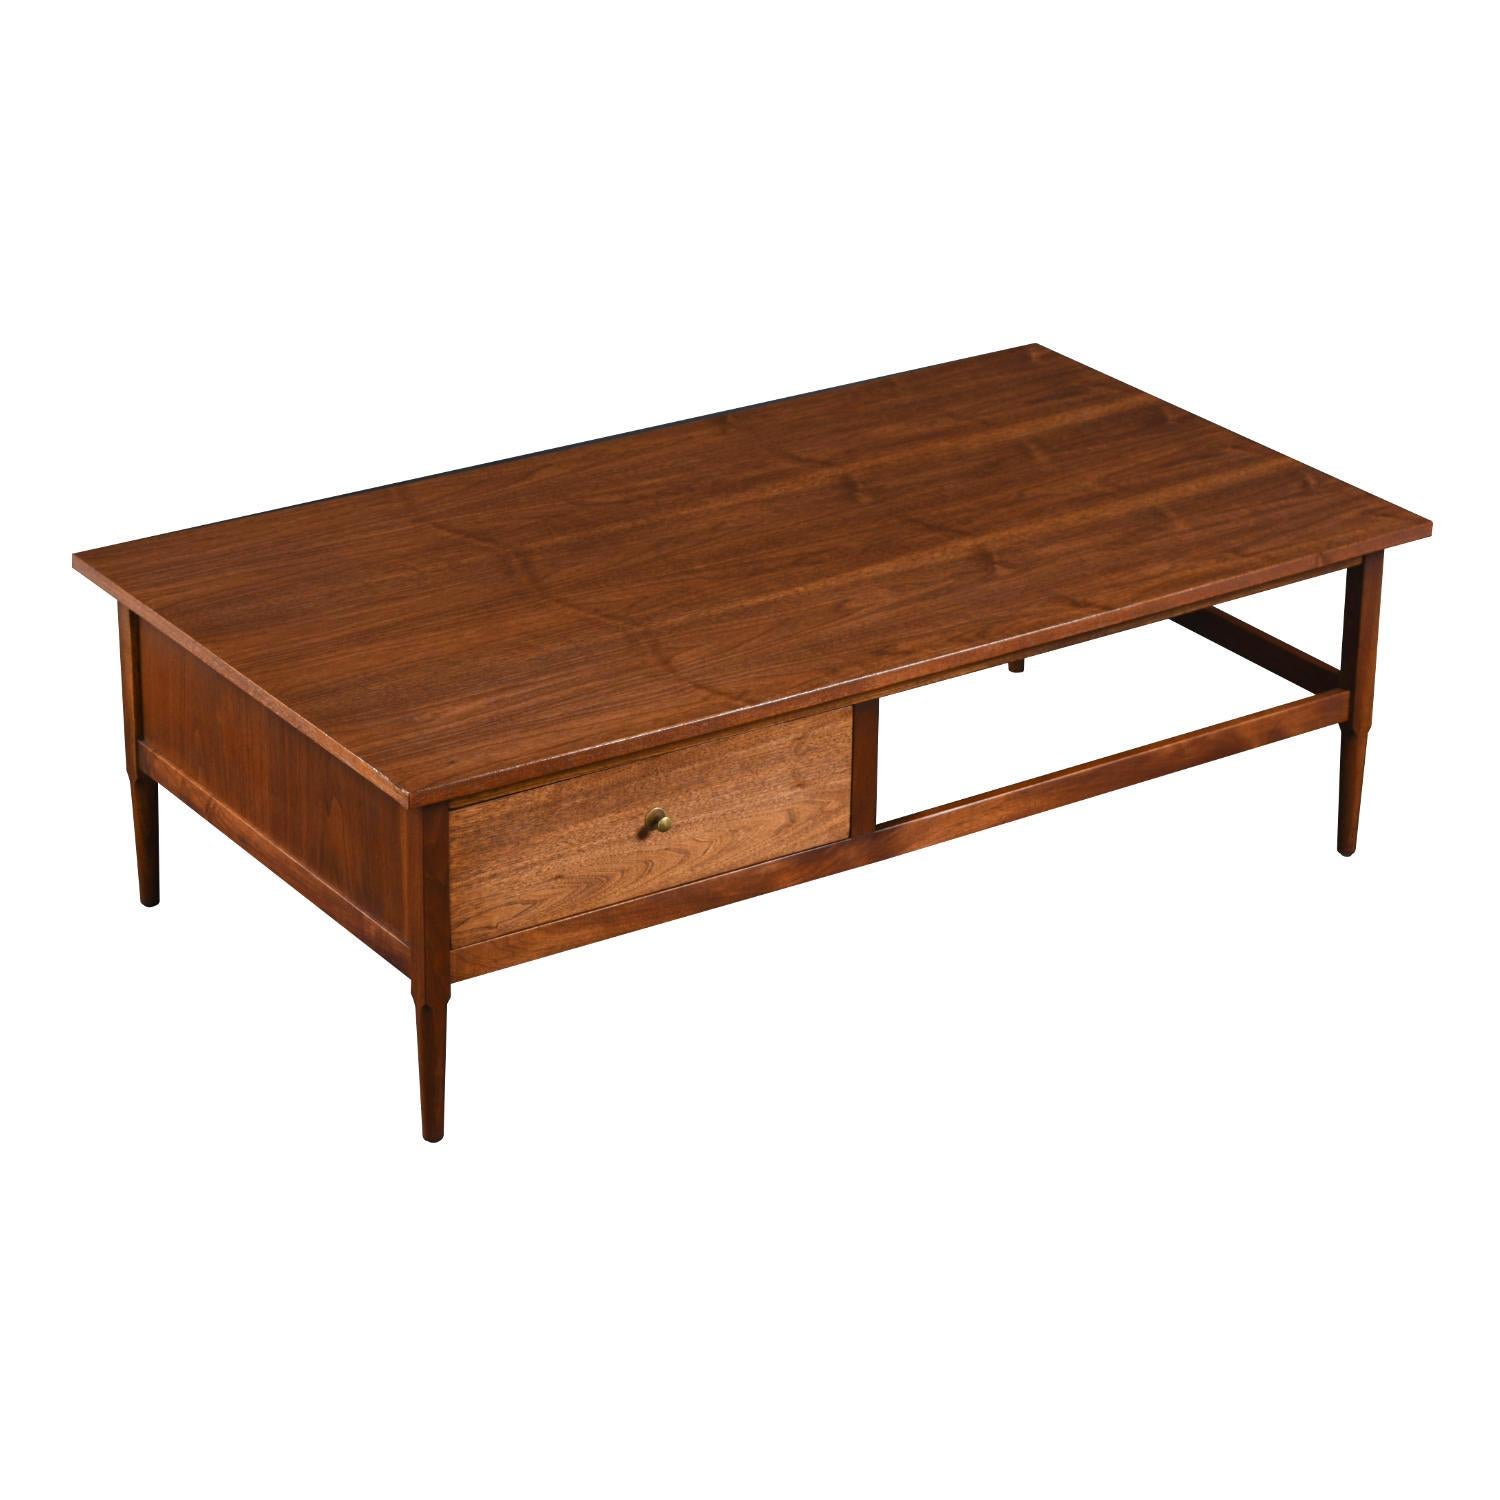 Exquisite craftsmanship abounds on this large rectangular mid-century modern coffee table. The walnut coffee table was designed by Lawrence Peabody for Richardson Nemschoff and, fortunately, still has the label. Mid-Century Modern meets traditional